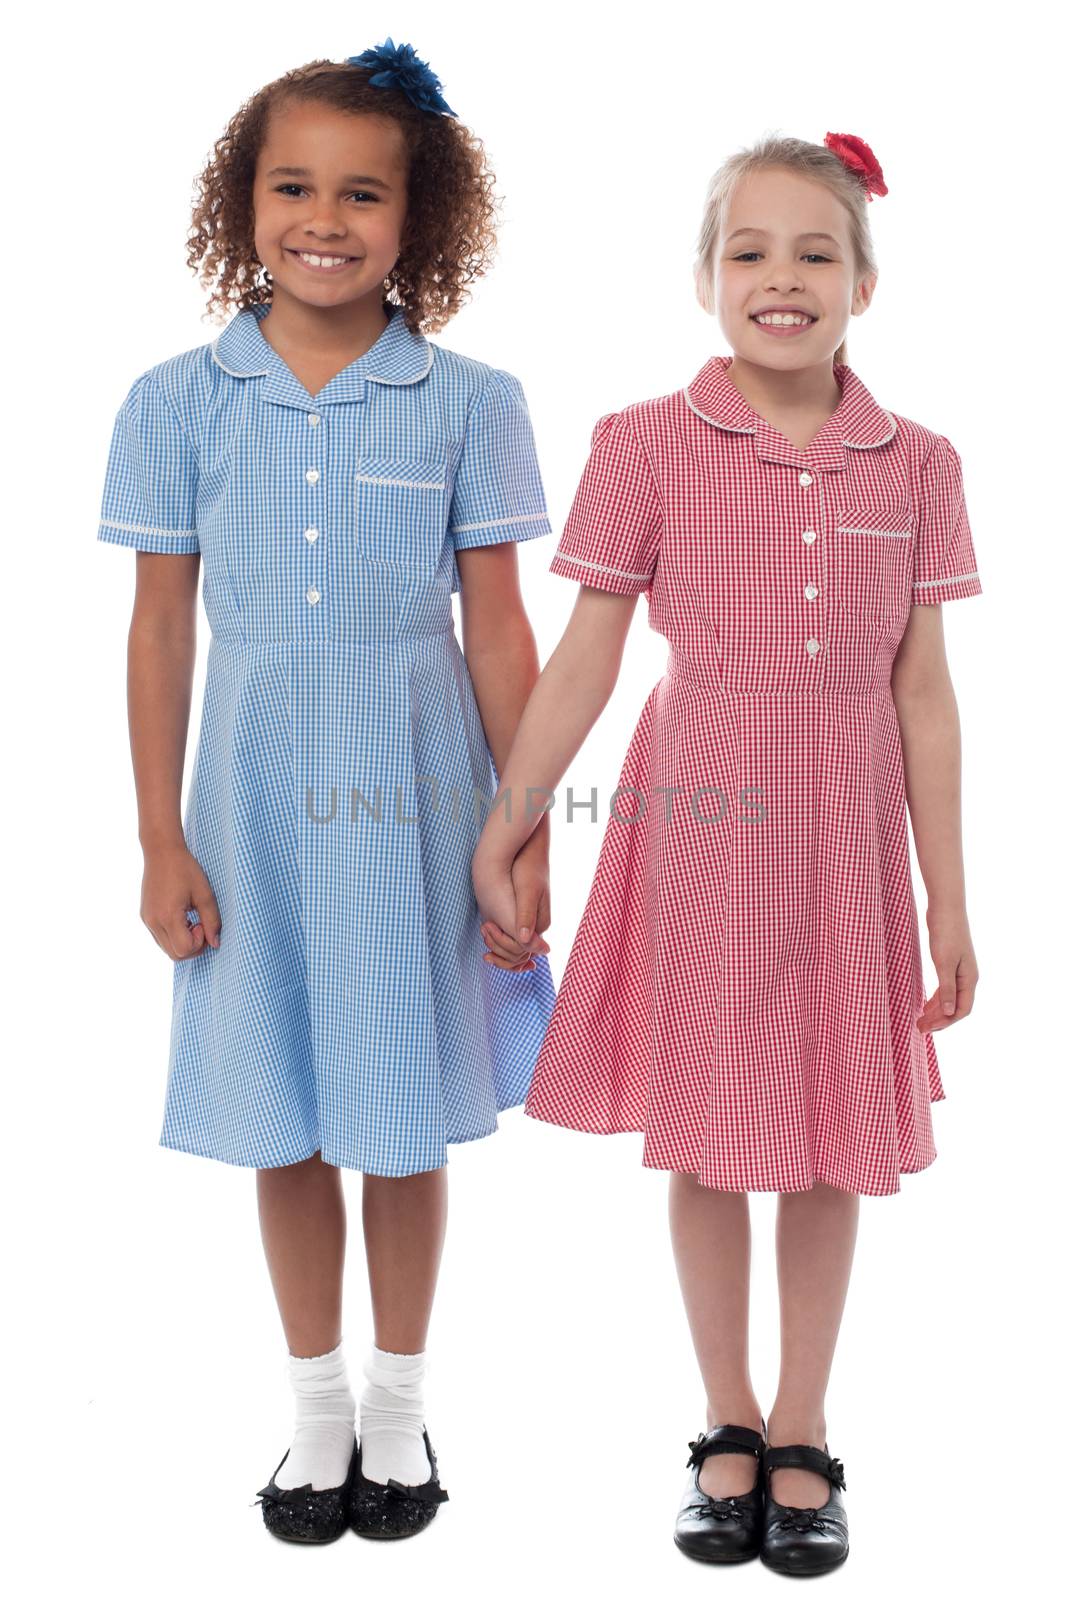 Cheerful school girls posing together, holding hands